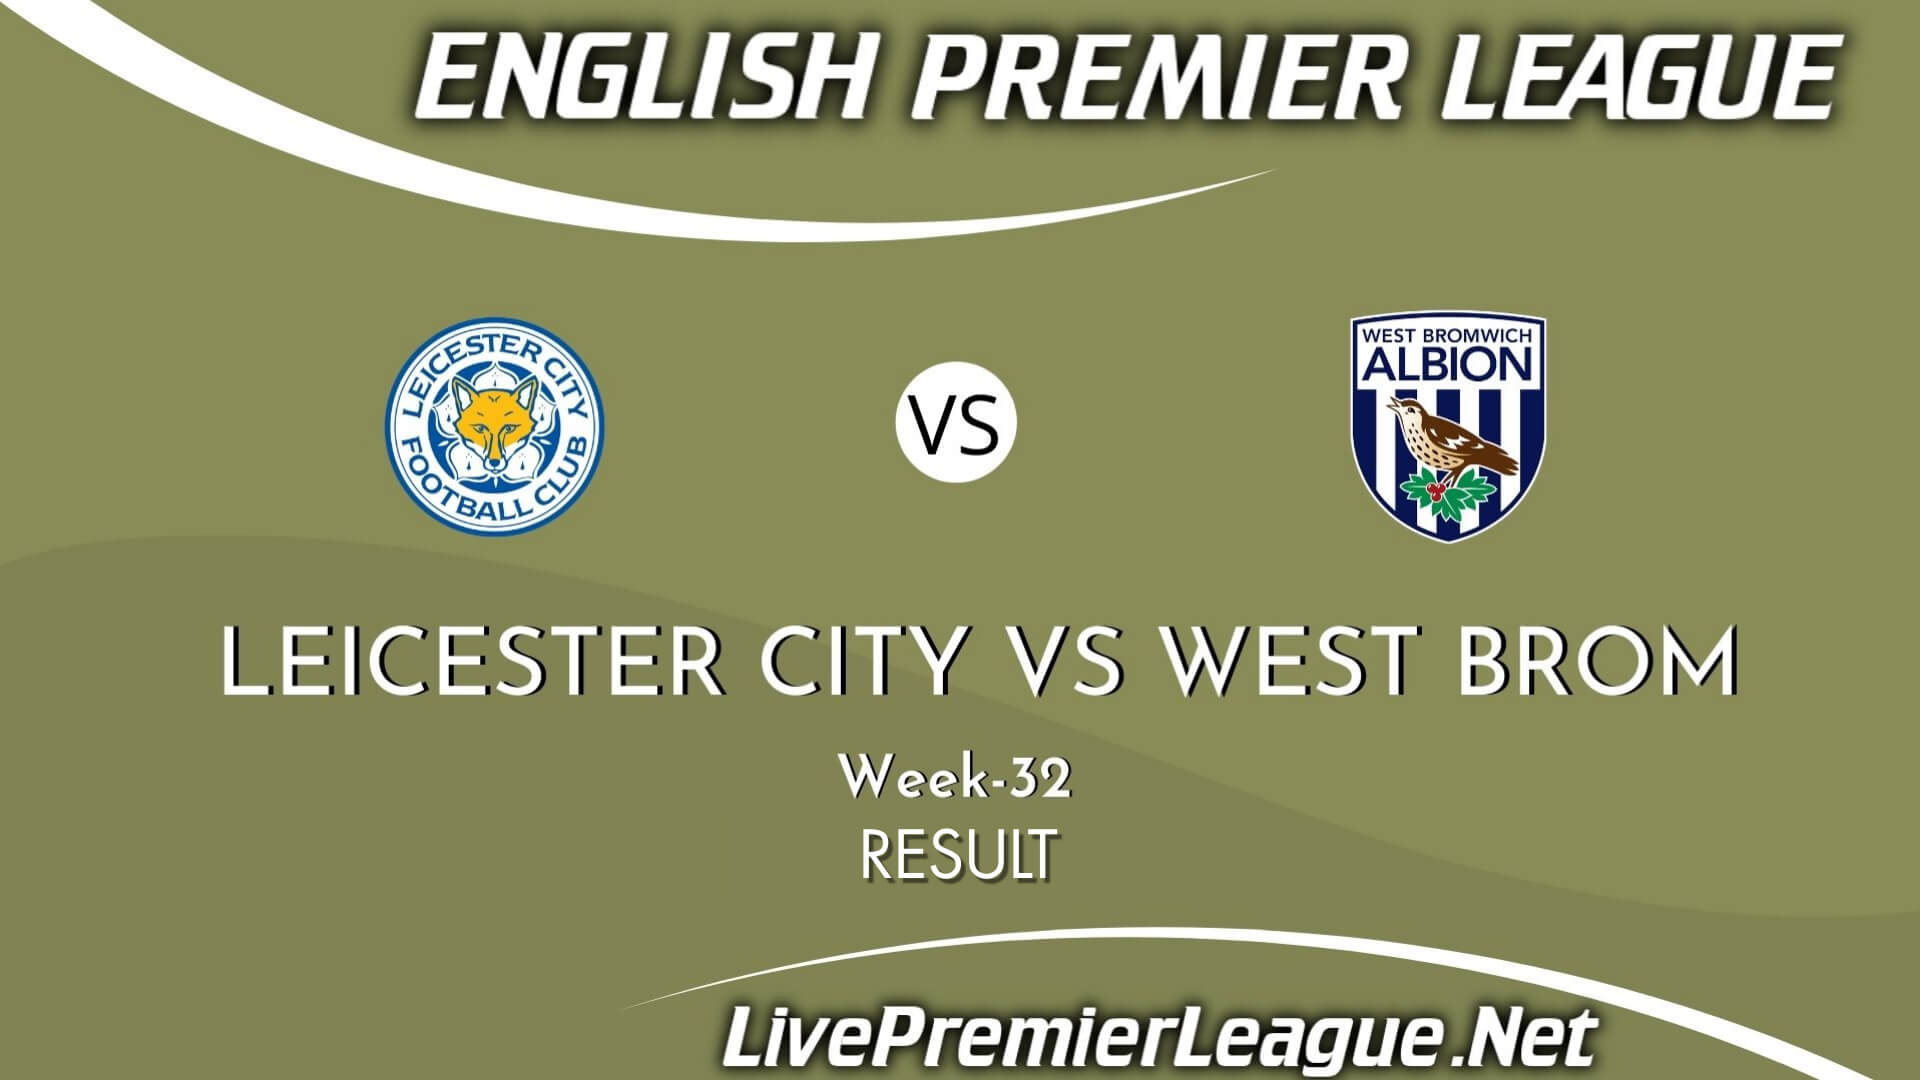 Leicester City Vs West Brom Result 2021 | EPL Week 32